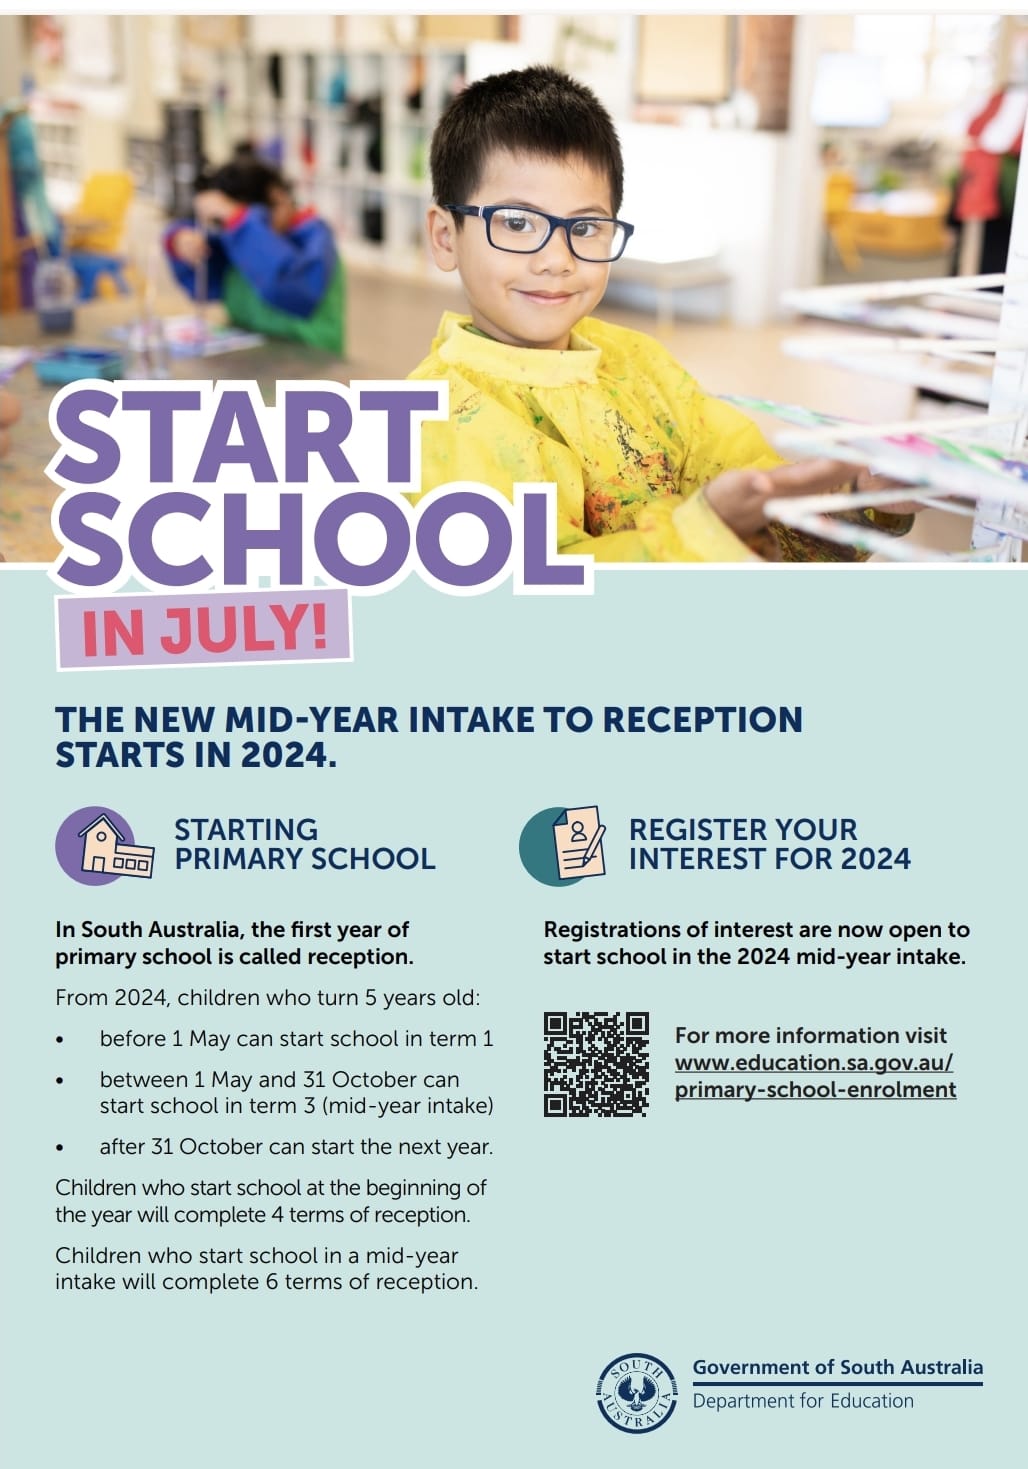 South Australian Department for Education (DFE) Introduces Mid-Year Intakes for Reception